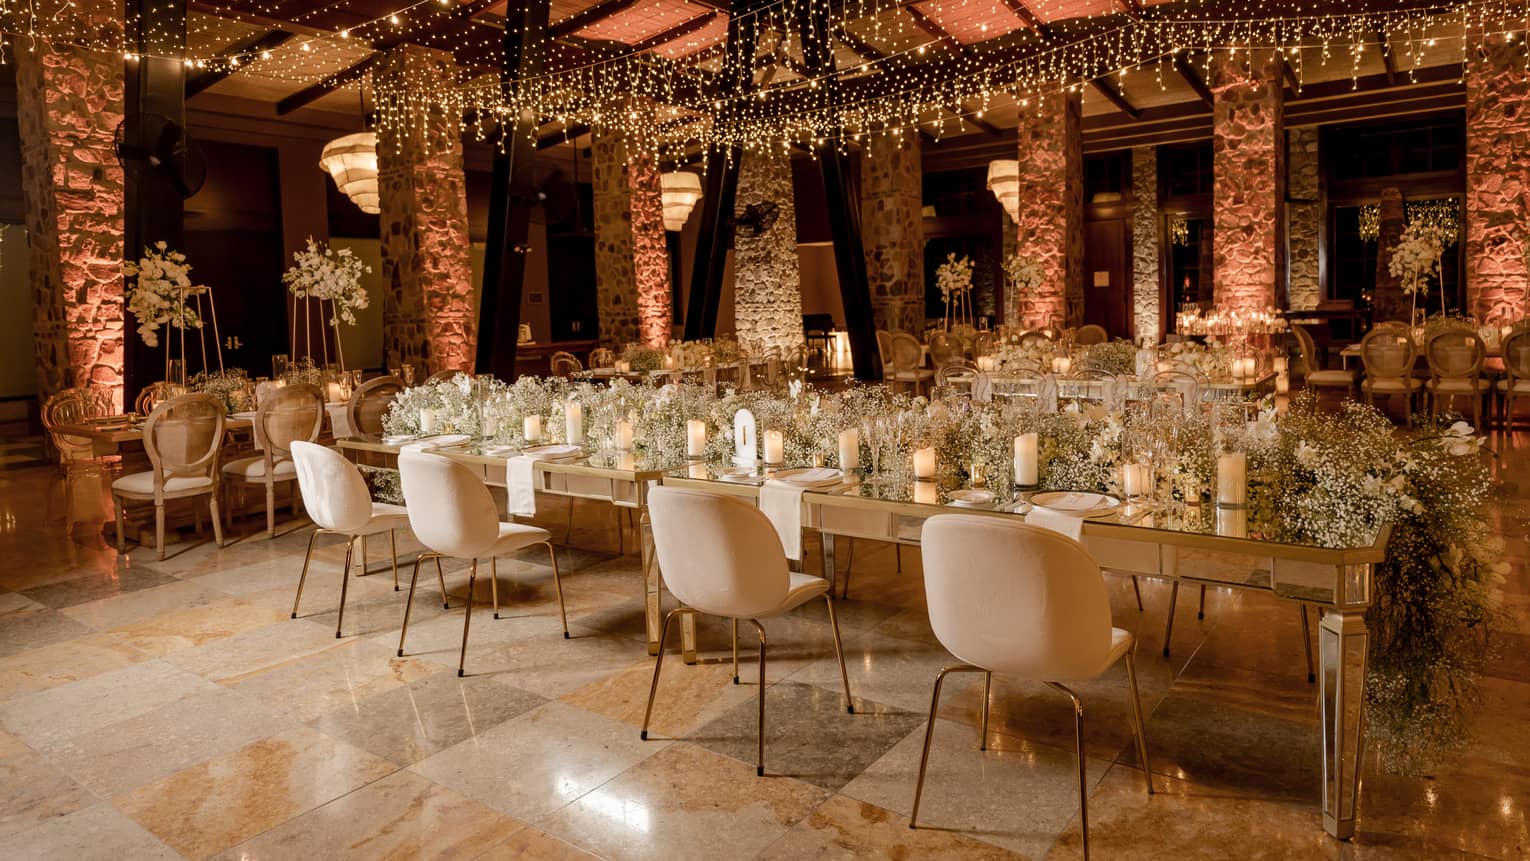 Ornately decorated function room arranged banquet style with stone pillars